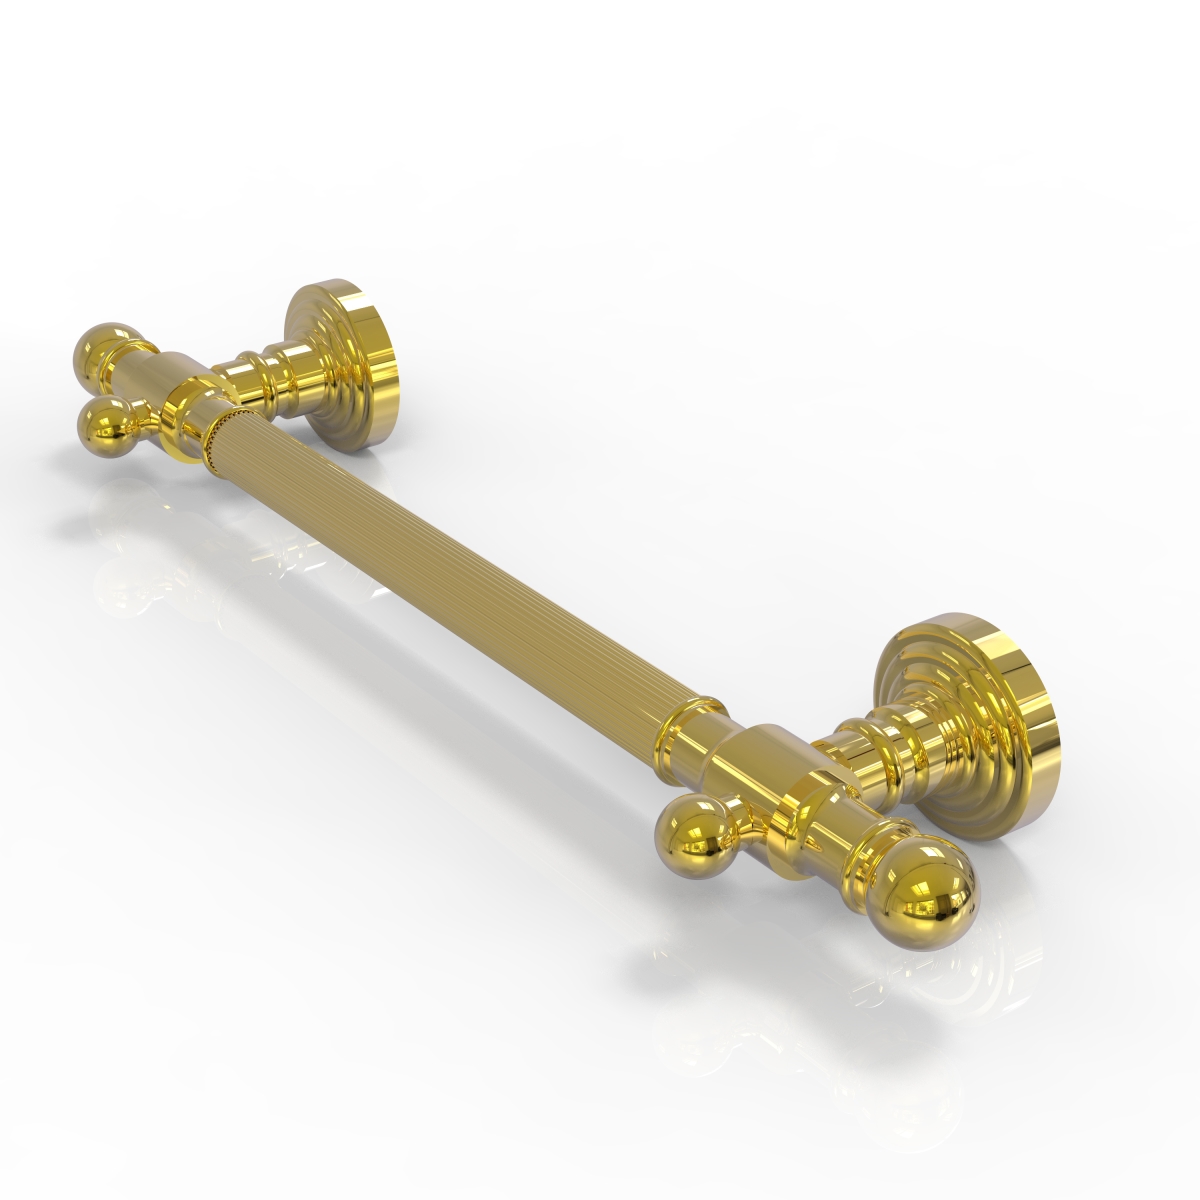 Picture of Allied Brass WP-GRR-16-PB 16 in. Reeded Grab Bar, Polished Brass - 3.5 x 22 x 16 in.